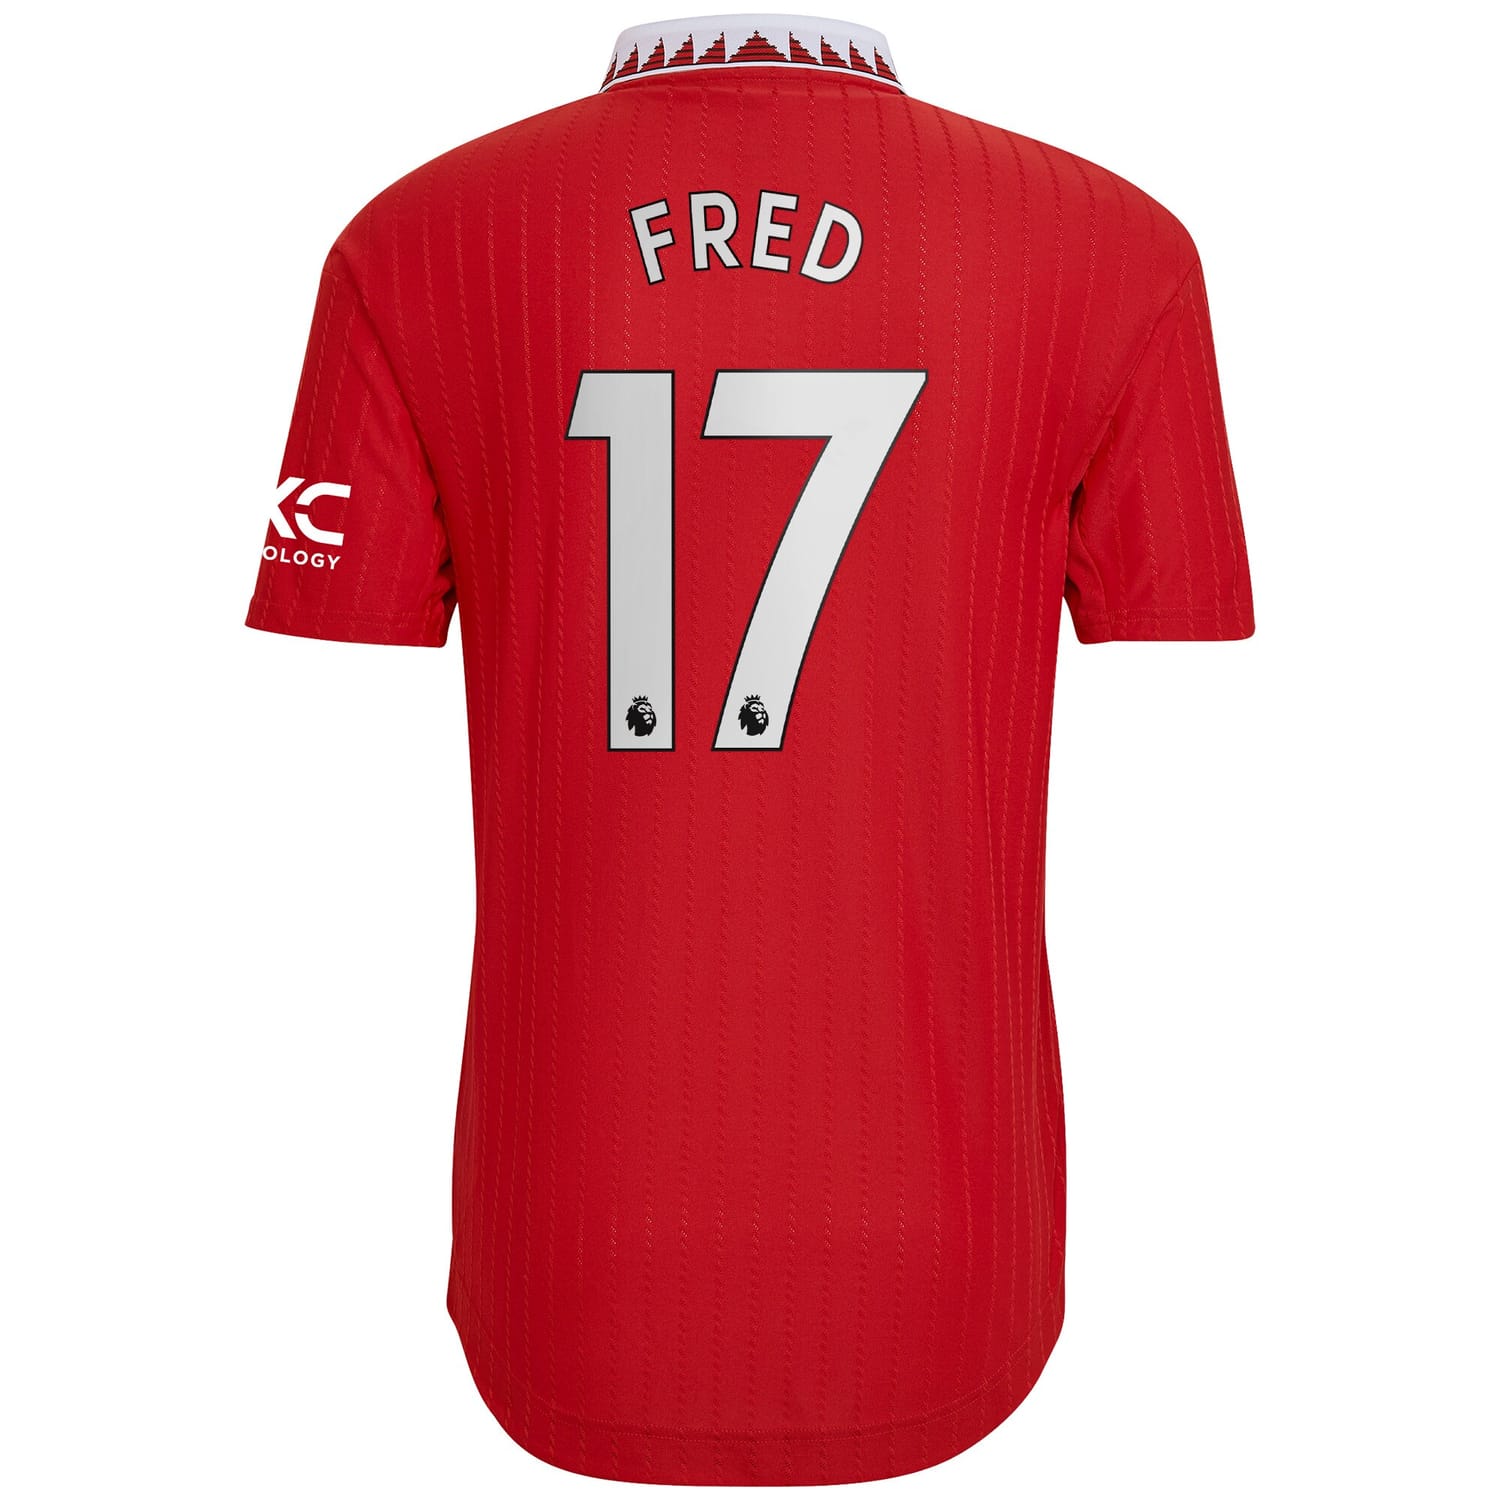 Premier League Manchester United Home Authentic Jersey Shirt 2022-23 player Fred 17 printing for Men